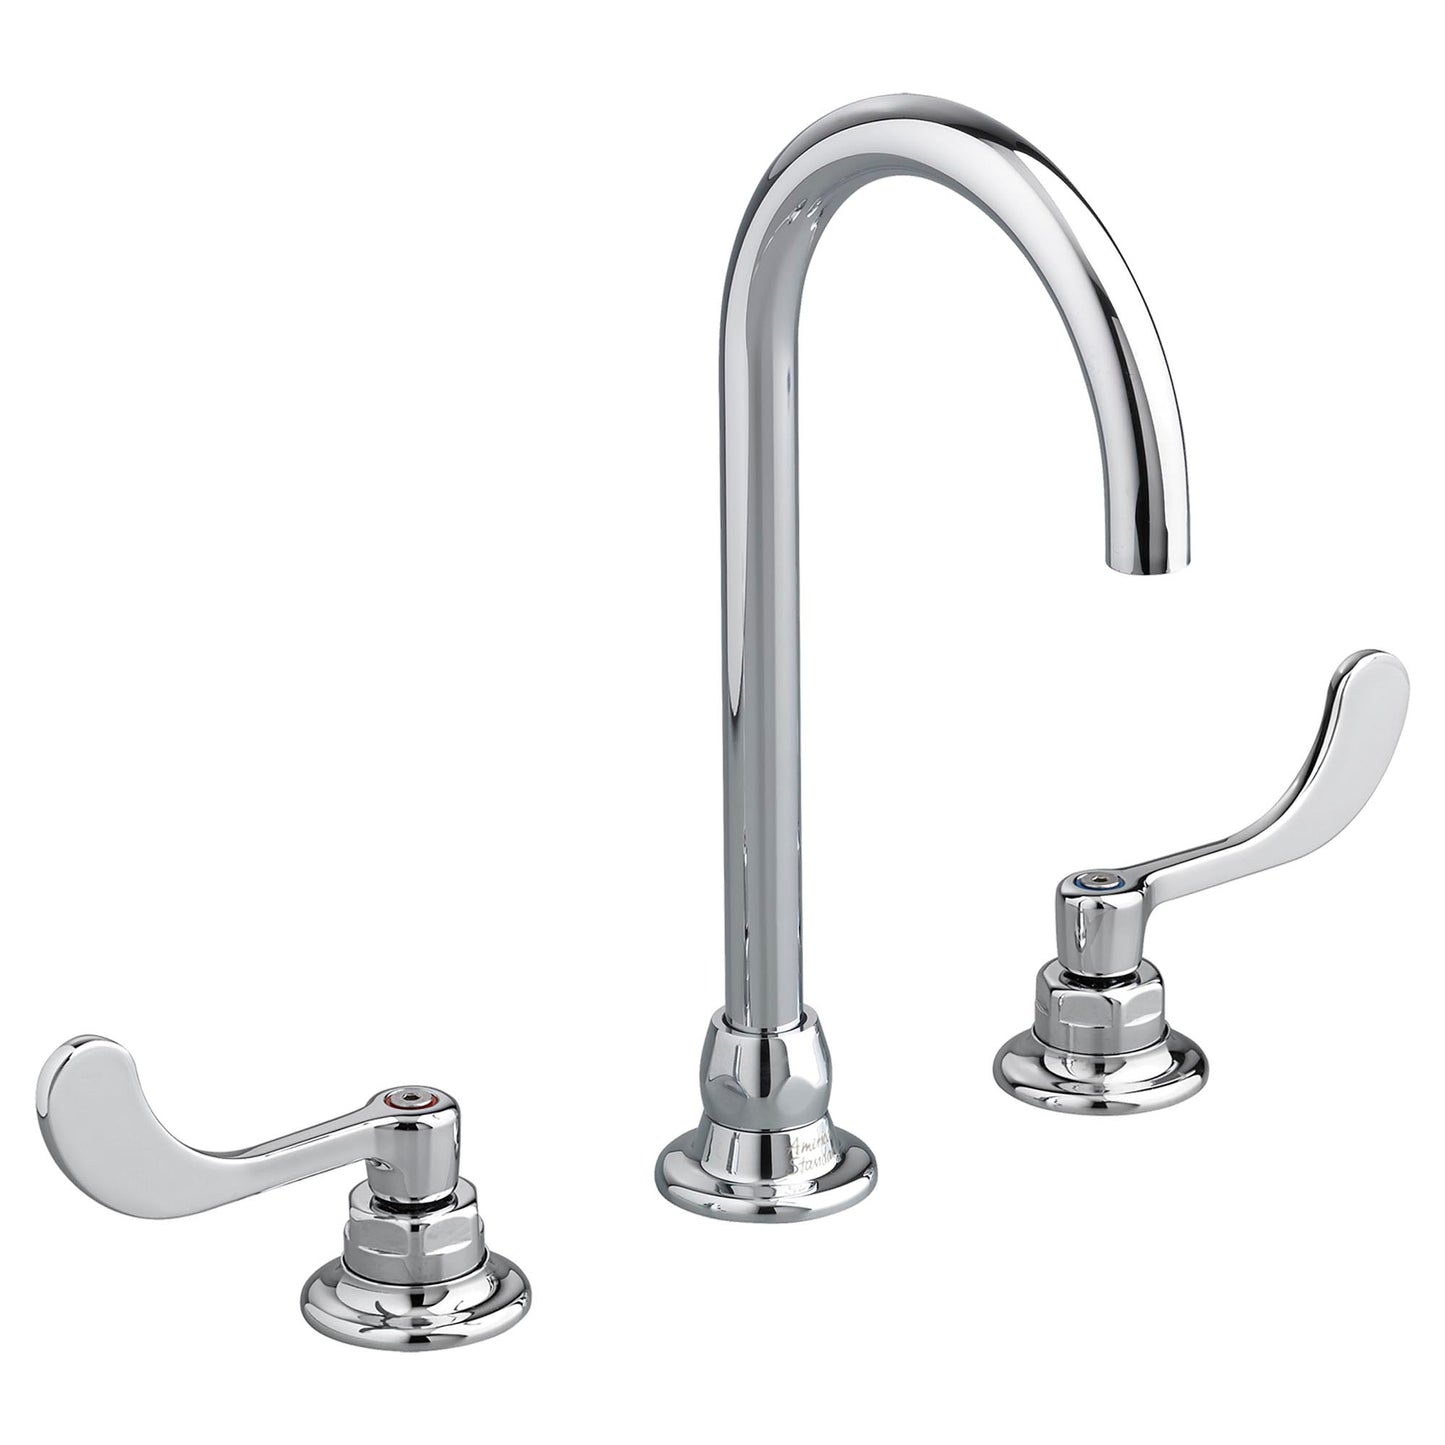 AMERICAN-STANDARD 6540180.002, Monterrey 8-inch Widespread Gooseneck Faucet With Wrist Blade Handles 1.5 gpm/5.7 Lpm Laminar Flow in Spout Base in Chrome